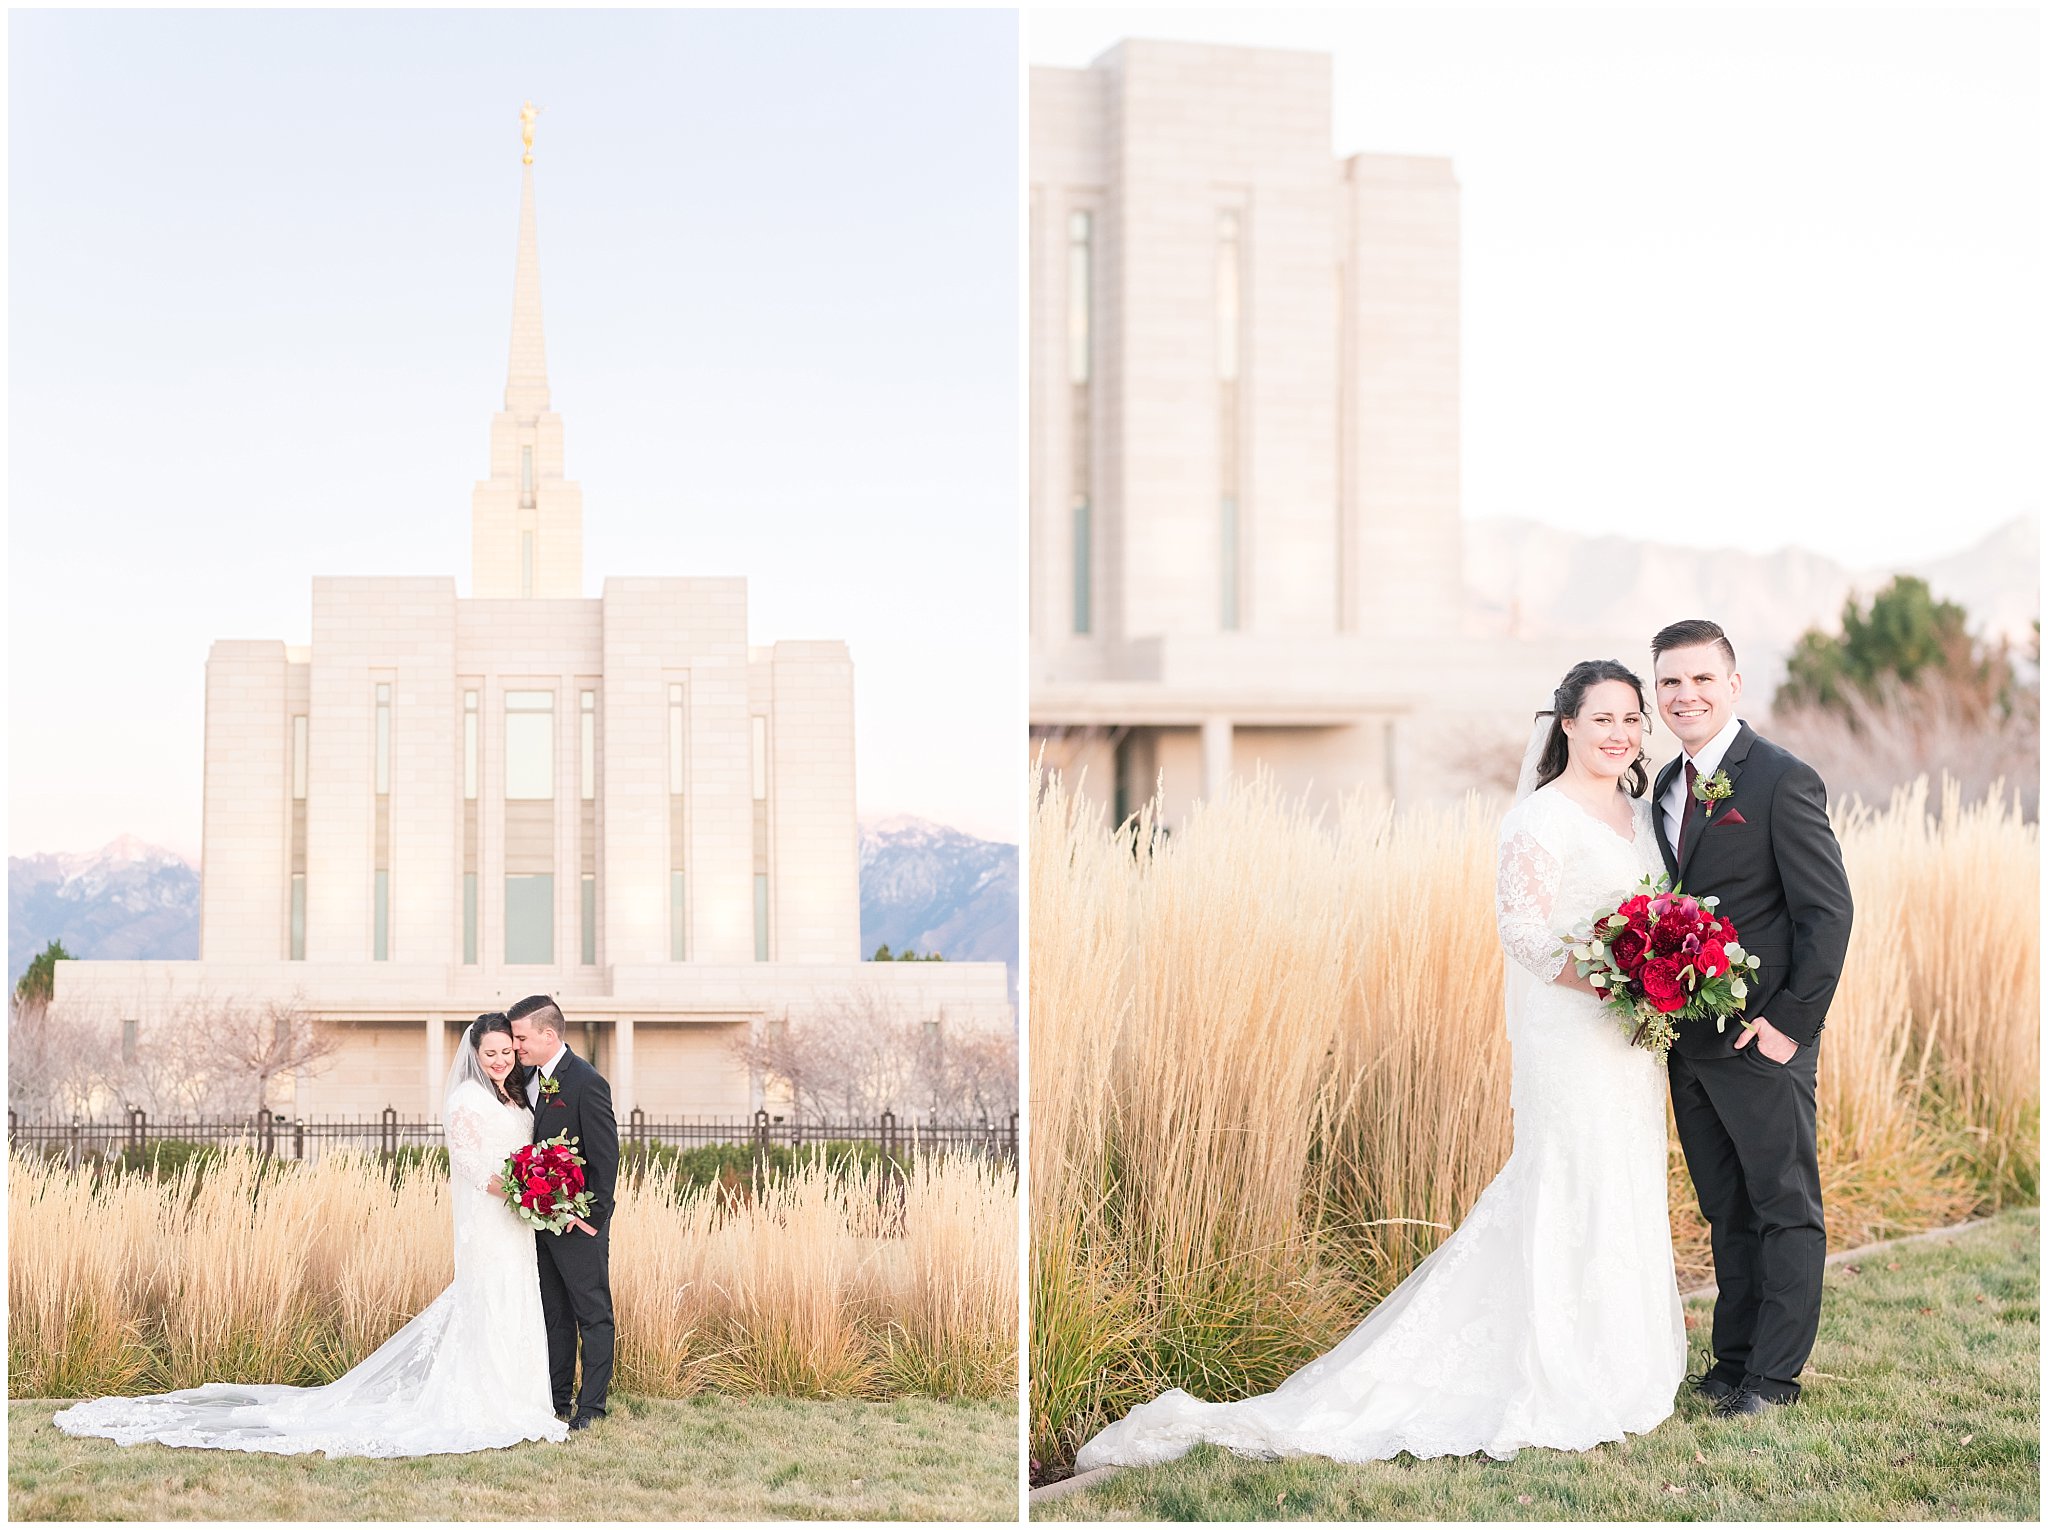 Bride in lace dress and veil with red floral Christmas theme bouquet and groom in black suit with burgundy tie | Utah mountains purple at sunset | oquirrh mountain temple winter formal session | Jessie and Dallin Photography